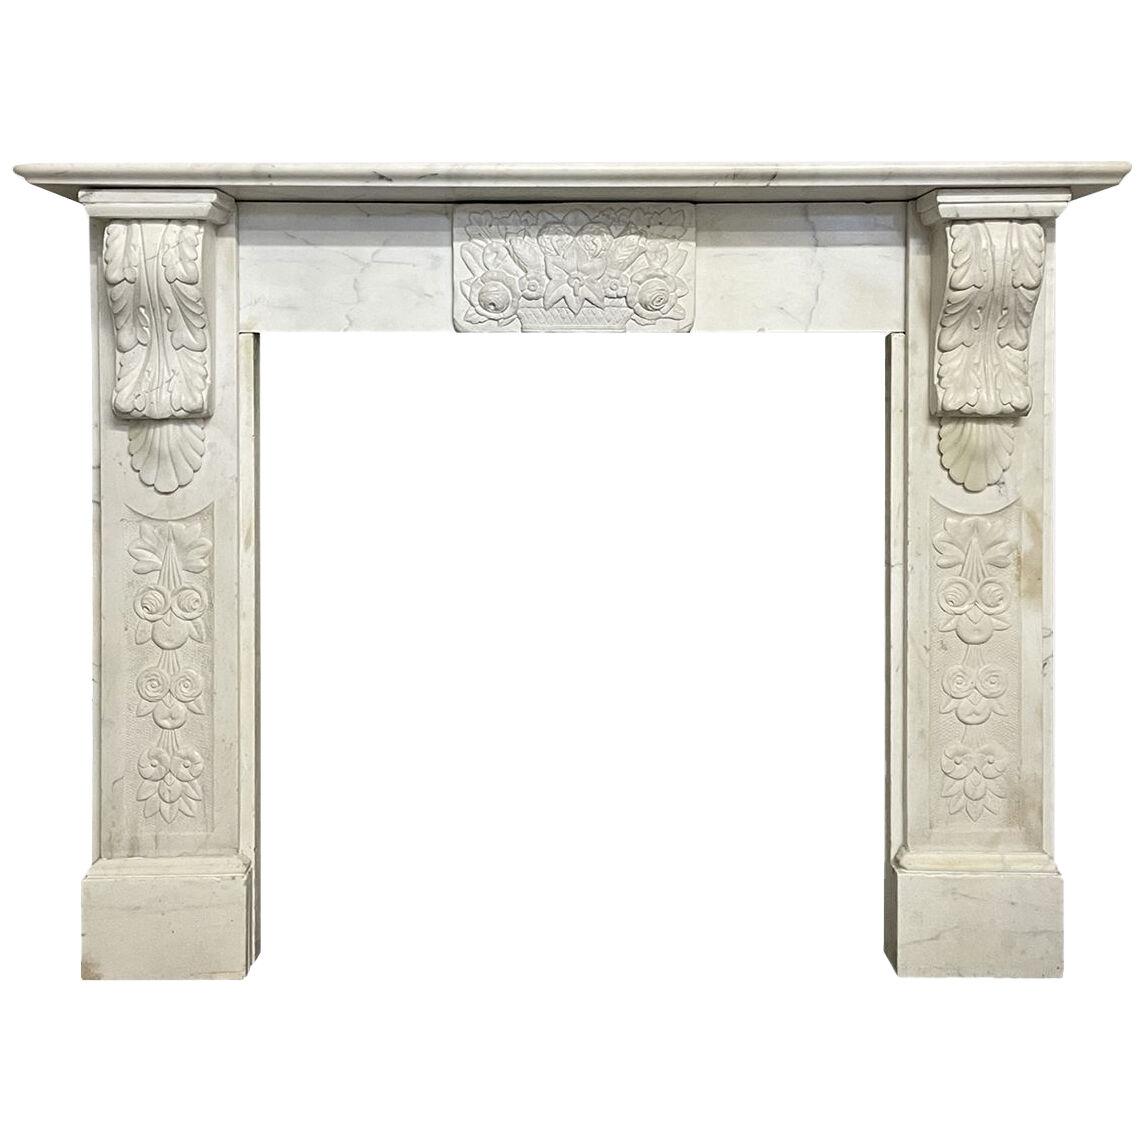 Victorian White Marble Carved Corbel Fireplace Mantel